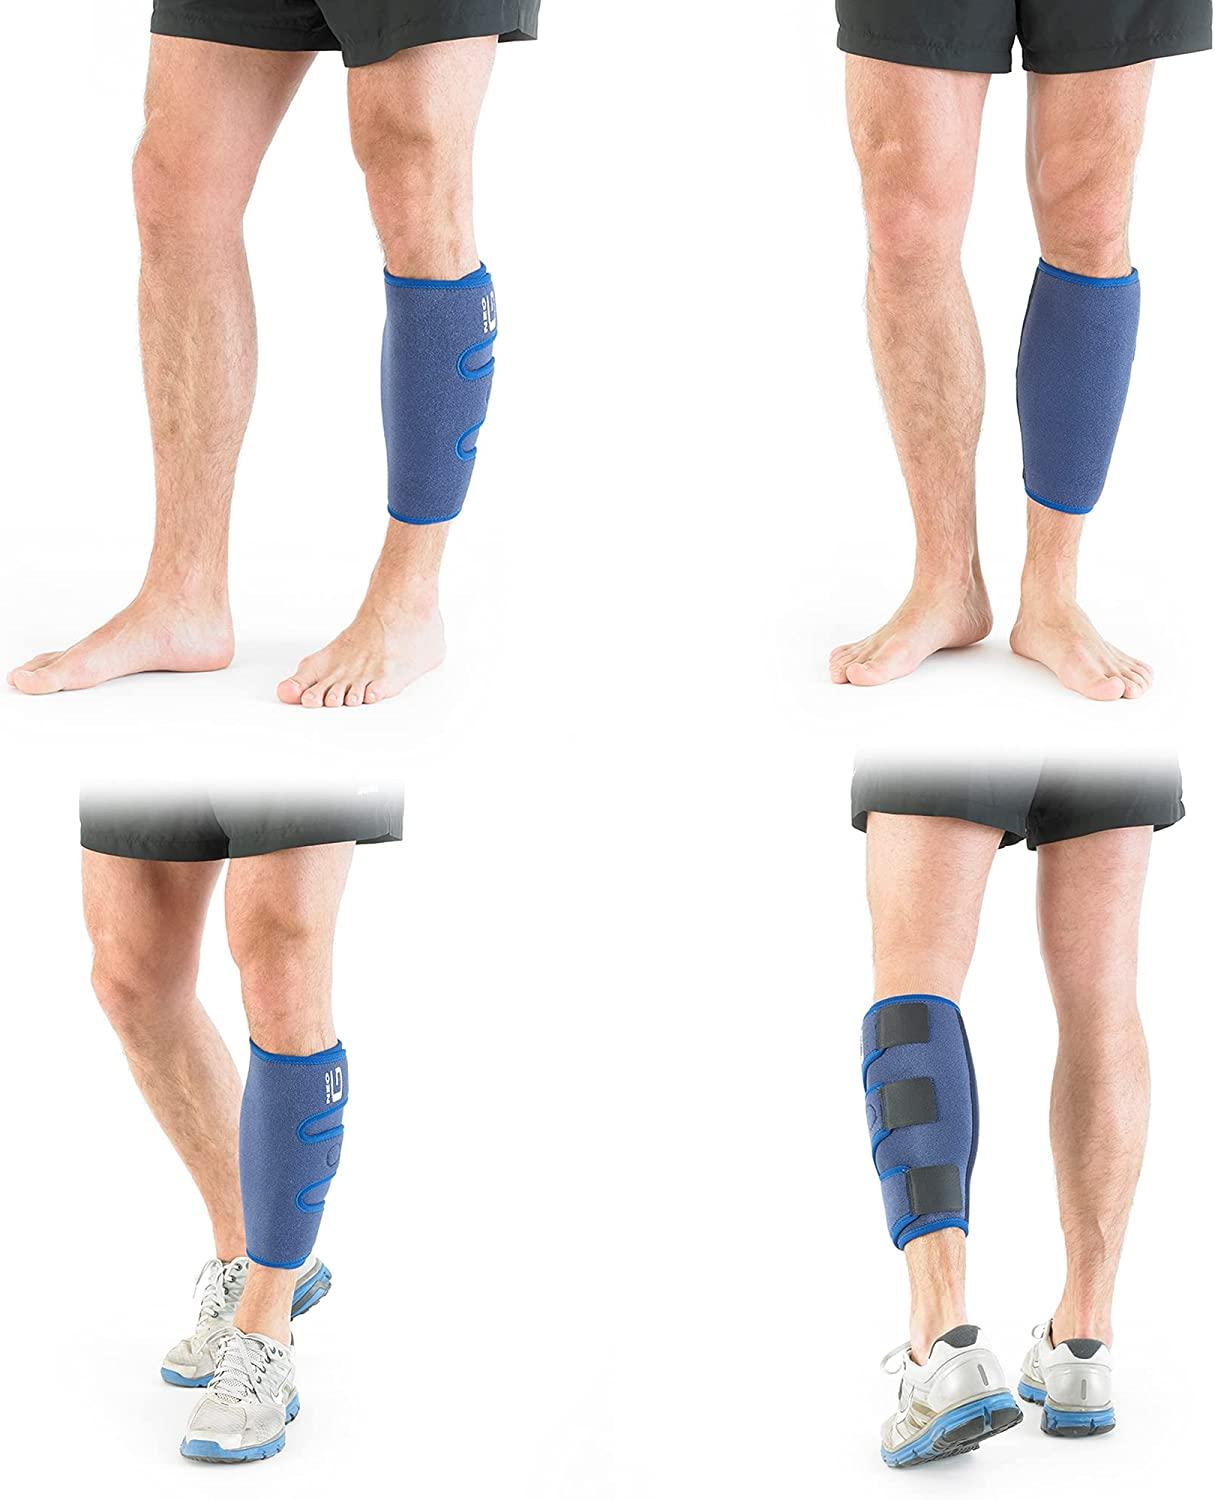 Neo-G Calf Shin Brace Support for Pain Relief from Calf Injury, Shin  Splints Treatment, Sprains, Running, Sports, Recovery - Adjustable Calf Compression  Sleeve Men Women - Class 1 Medical Device